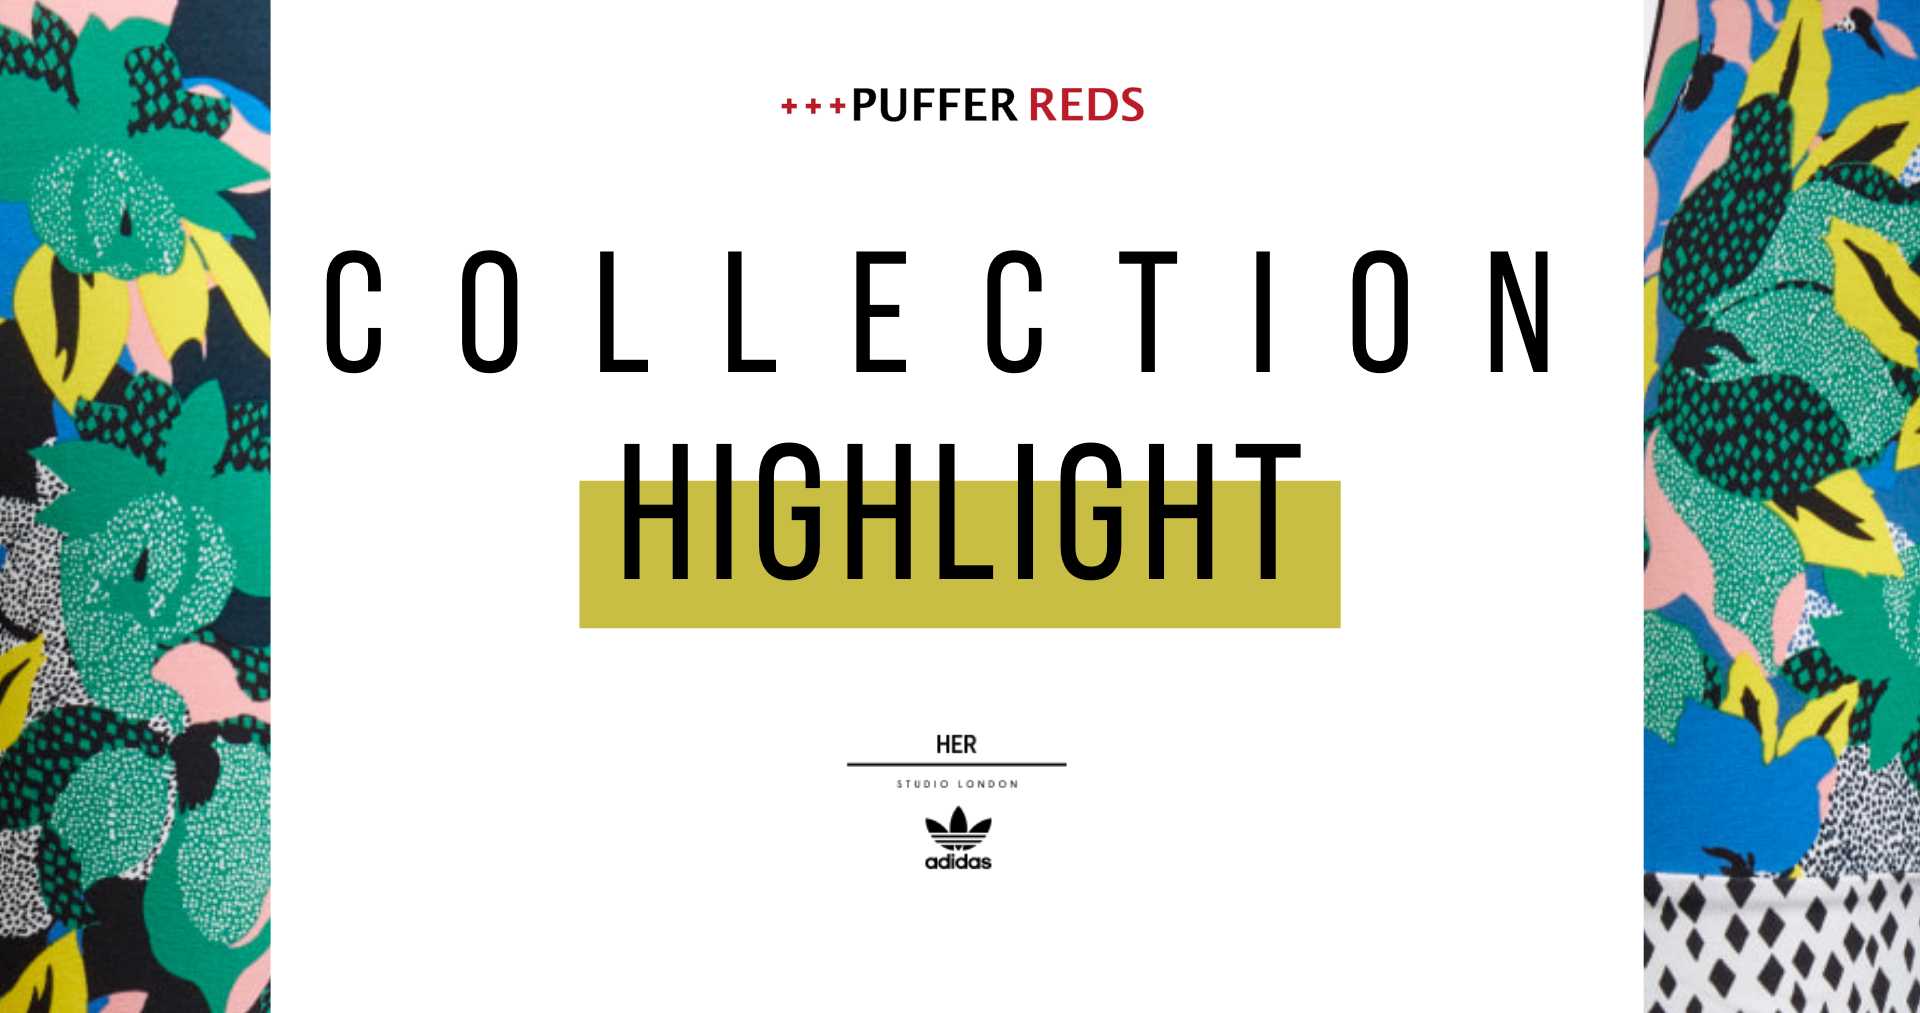 adidas x HER Studio Collection Highlight Puffer Reds